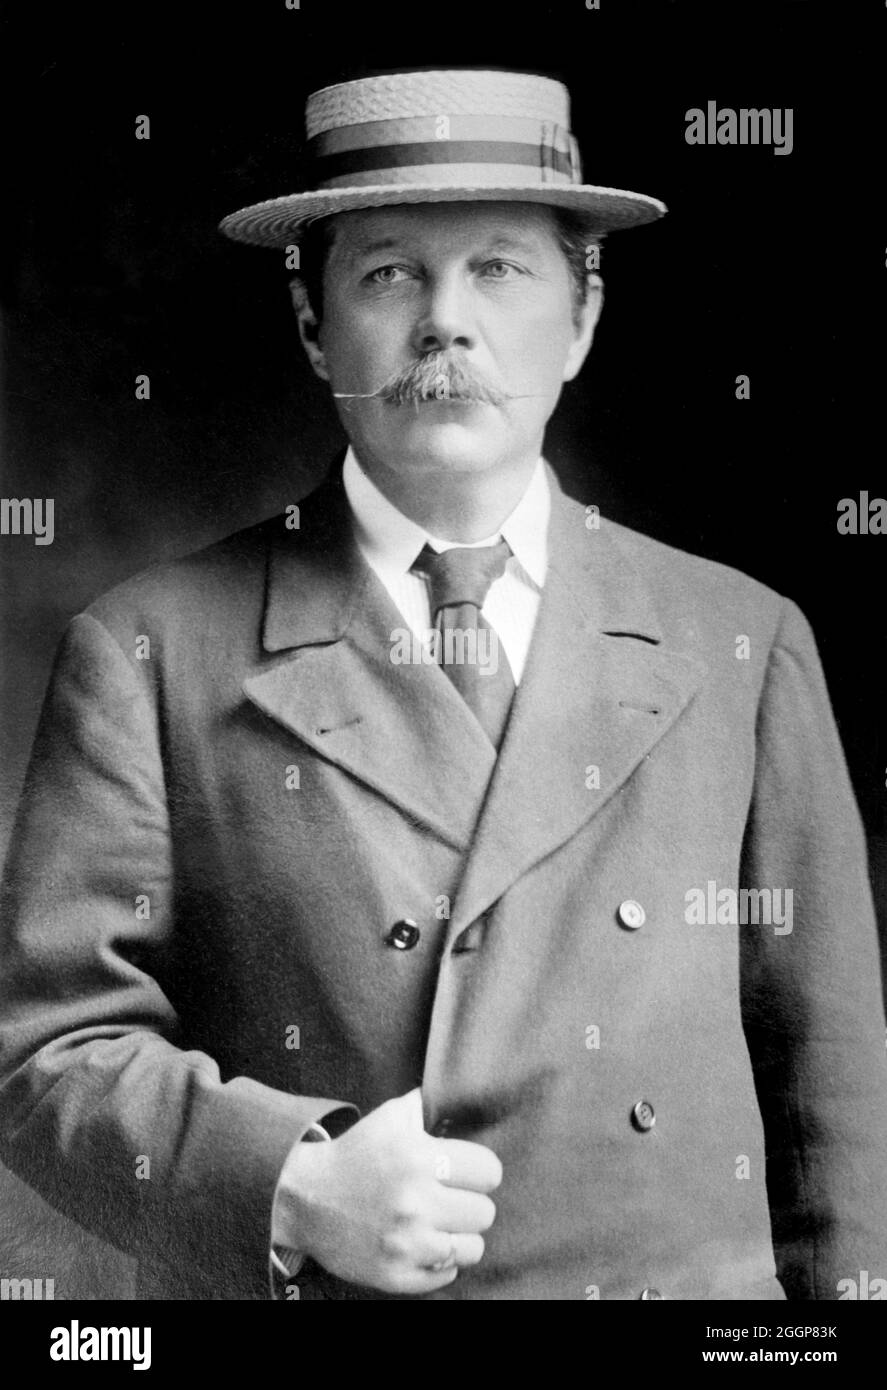 Arthur Conan Doyle (1859 - 1930) was a famous Scottish author and physician, most noted for his stories about the detective Sherlock Holmes. Stock Photo